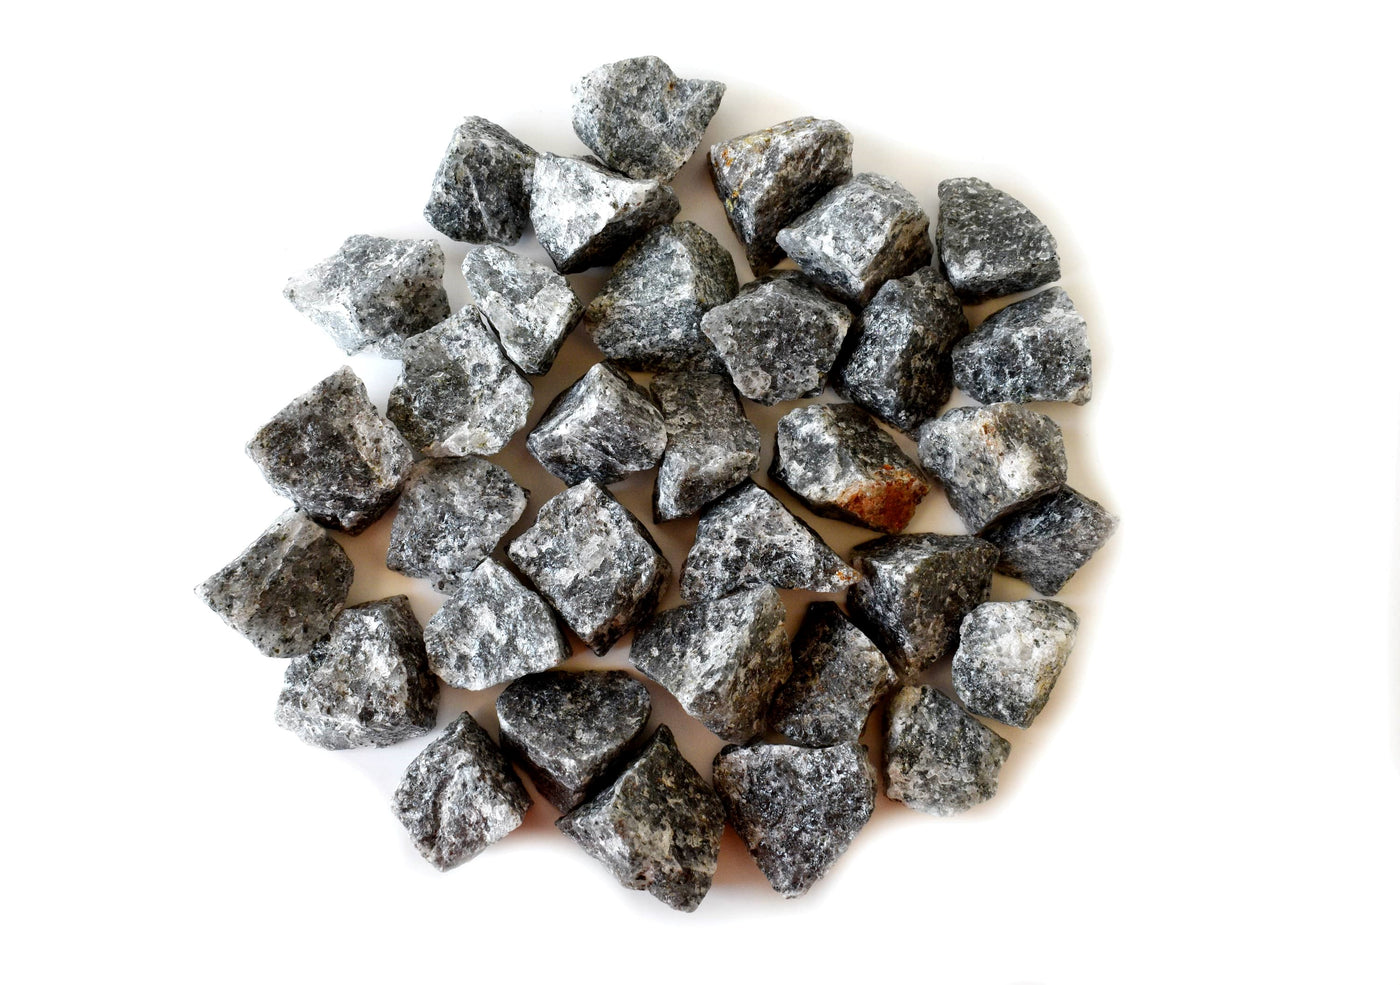 Black Rutile Rough Rocks (Promotes Strength and Growth)